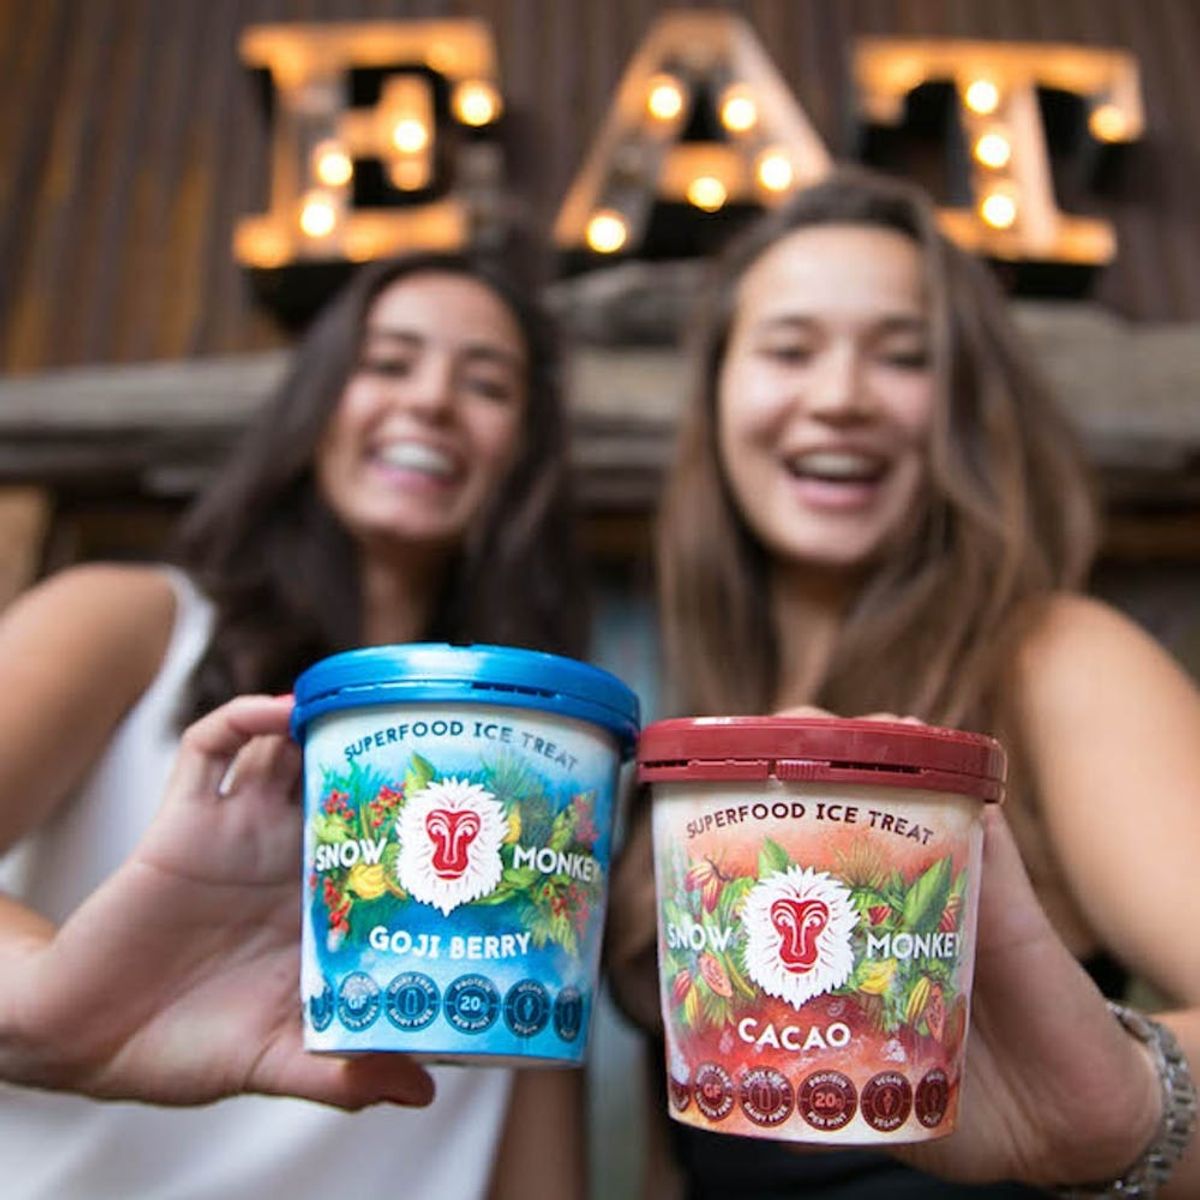 How Two College Roommates Turned a Food Allergy Into a Superfood Ice Cream